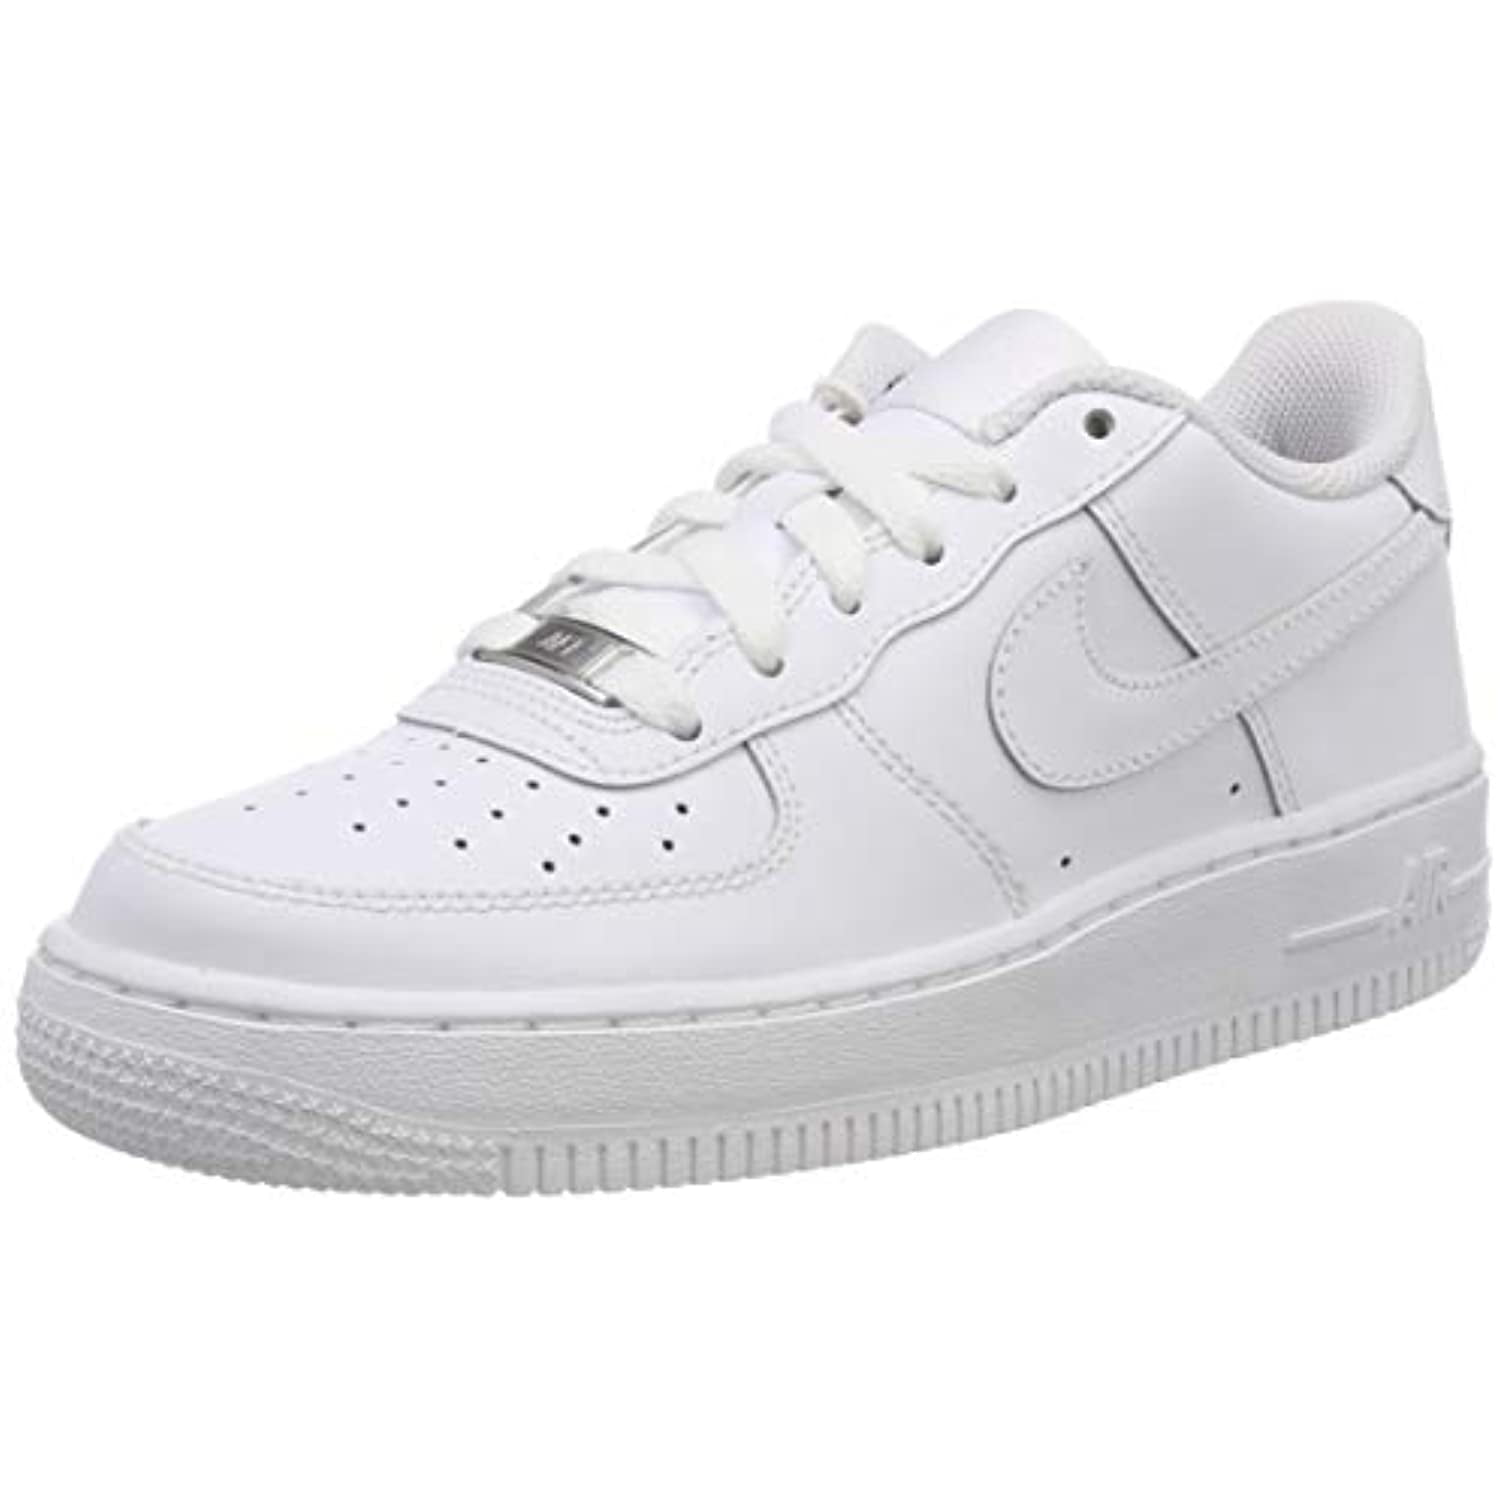 air force 1 white in store near me